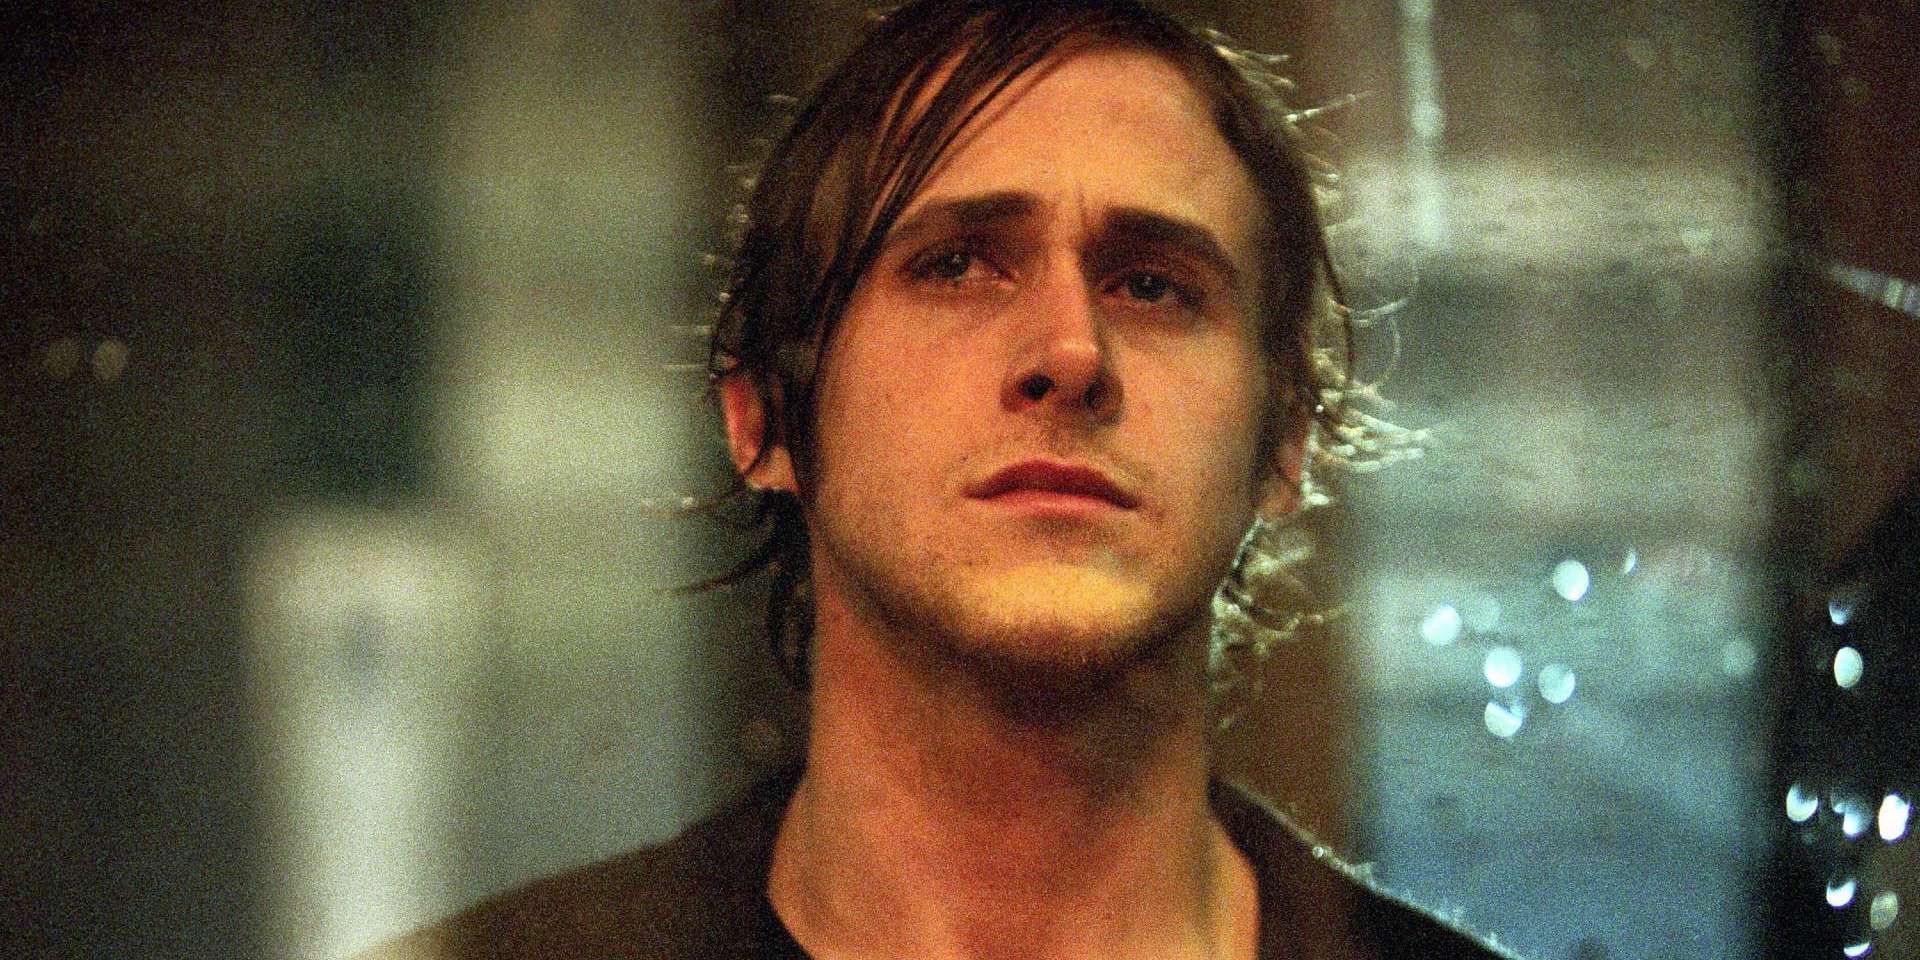 Henry Latham (Ryan Gosling) looking distraught and dishevelled in Stay.